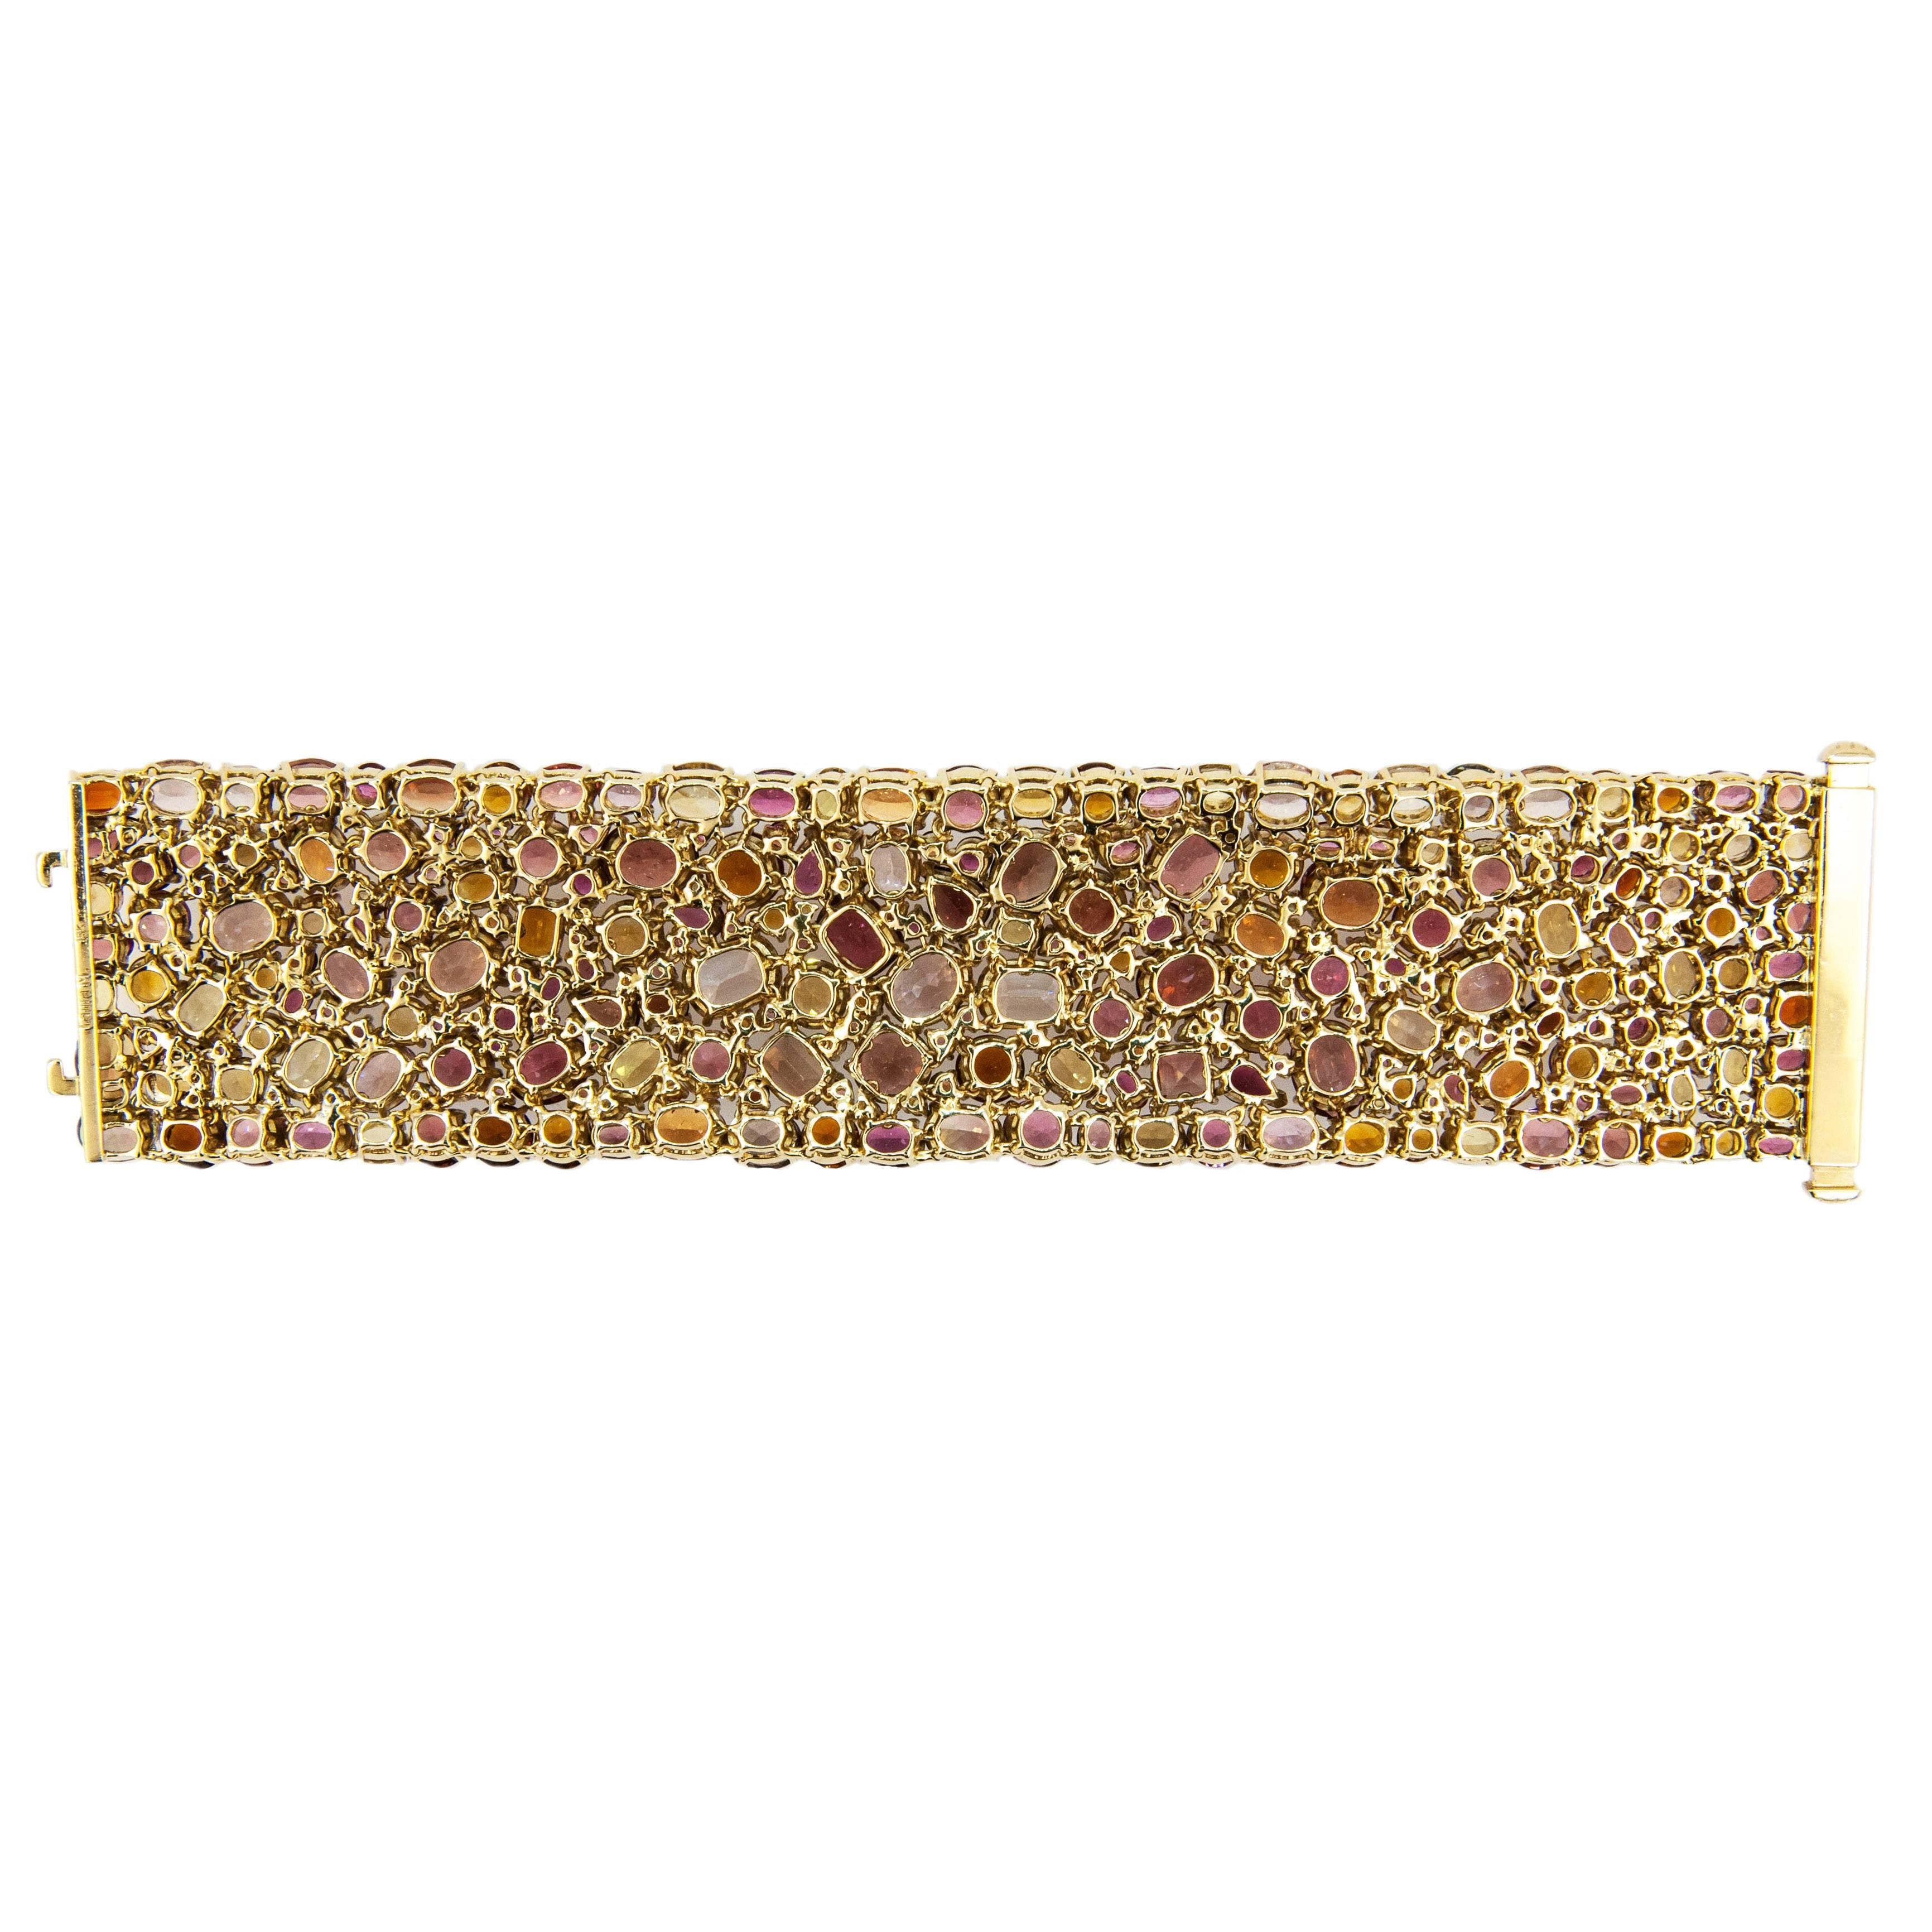 Magnificent 18k yellow gold Kaleidoscope bracelet. Set with 311 multi-colored, multi-shaped Citrine, Mandarin Garnet, Beryl, Garnet,Tourmaline and Sapphire. 173.62cts.twt. Shades of pink, yellow, orange and brown. 1 1/2" wide , 7 inch length.